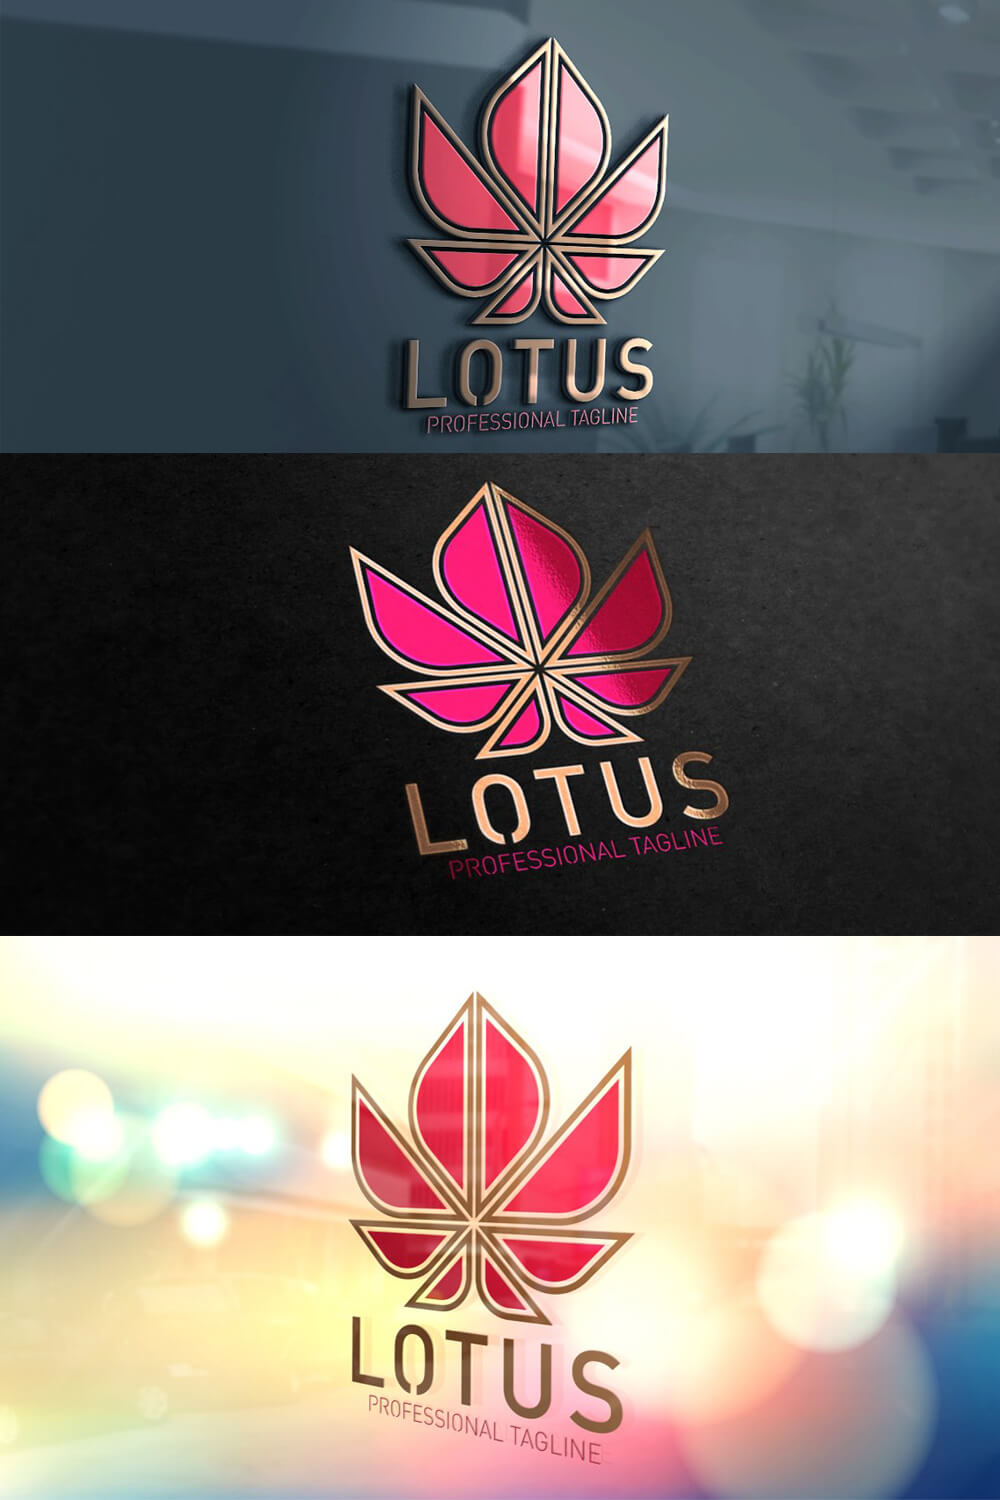 Logo with the image of a red lotus on different backgrounds.